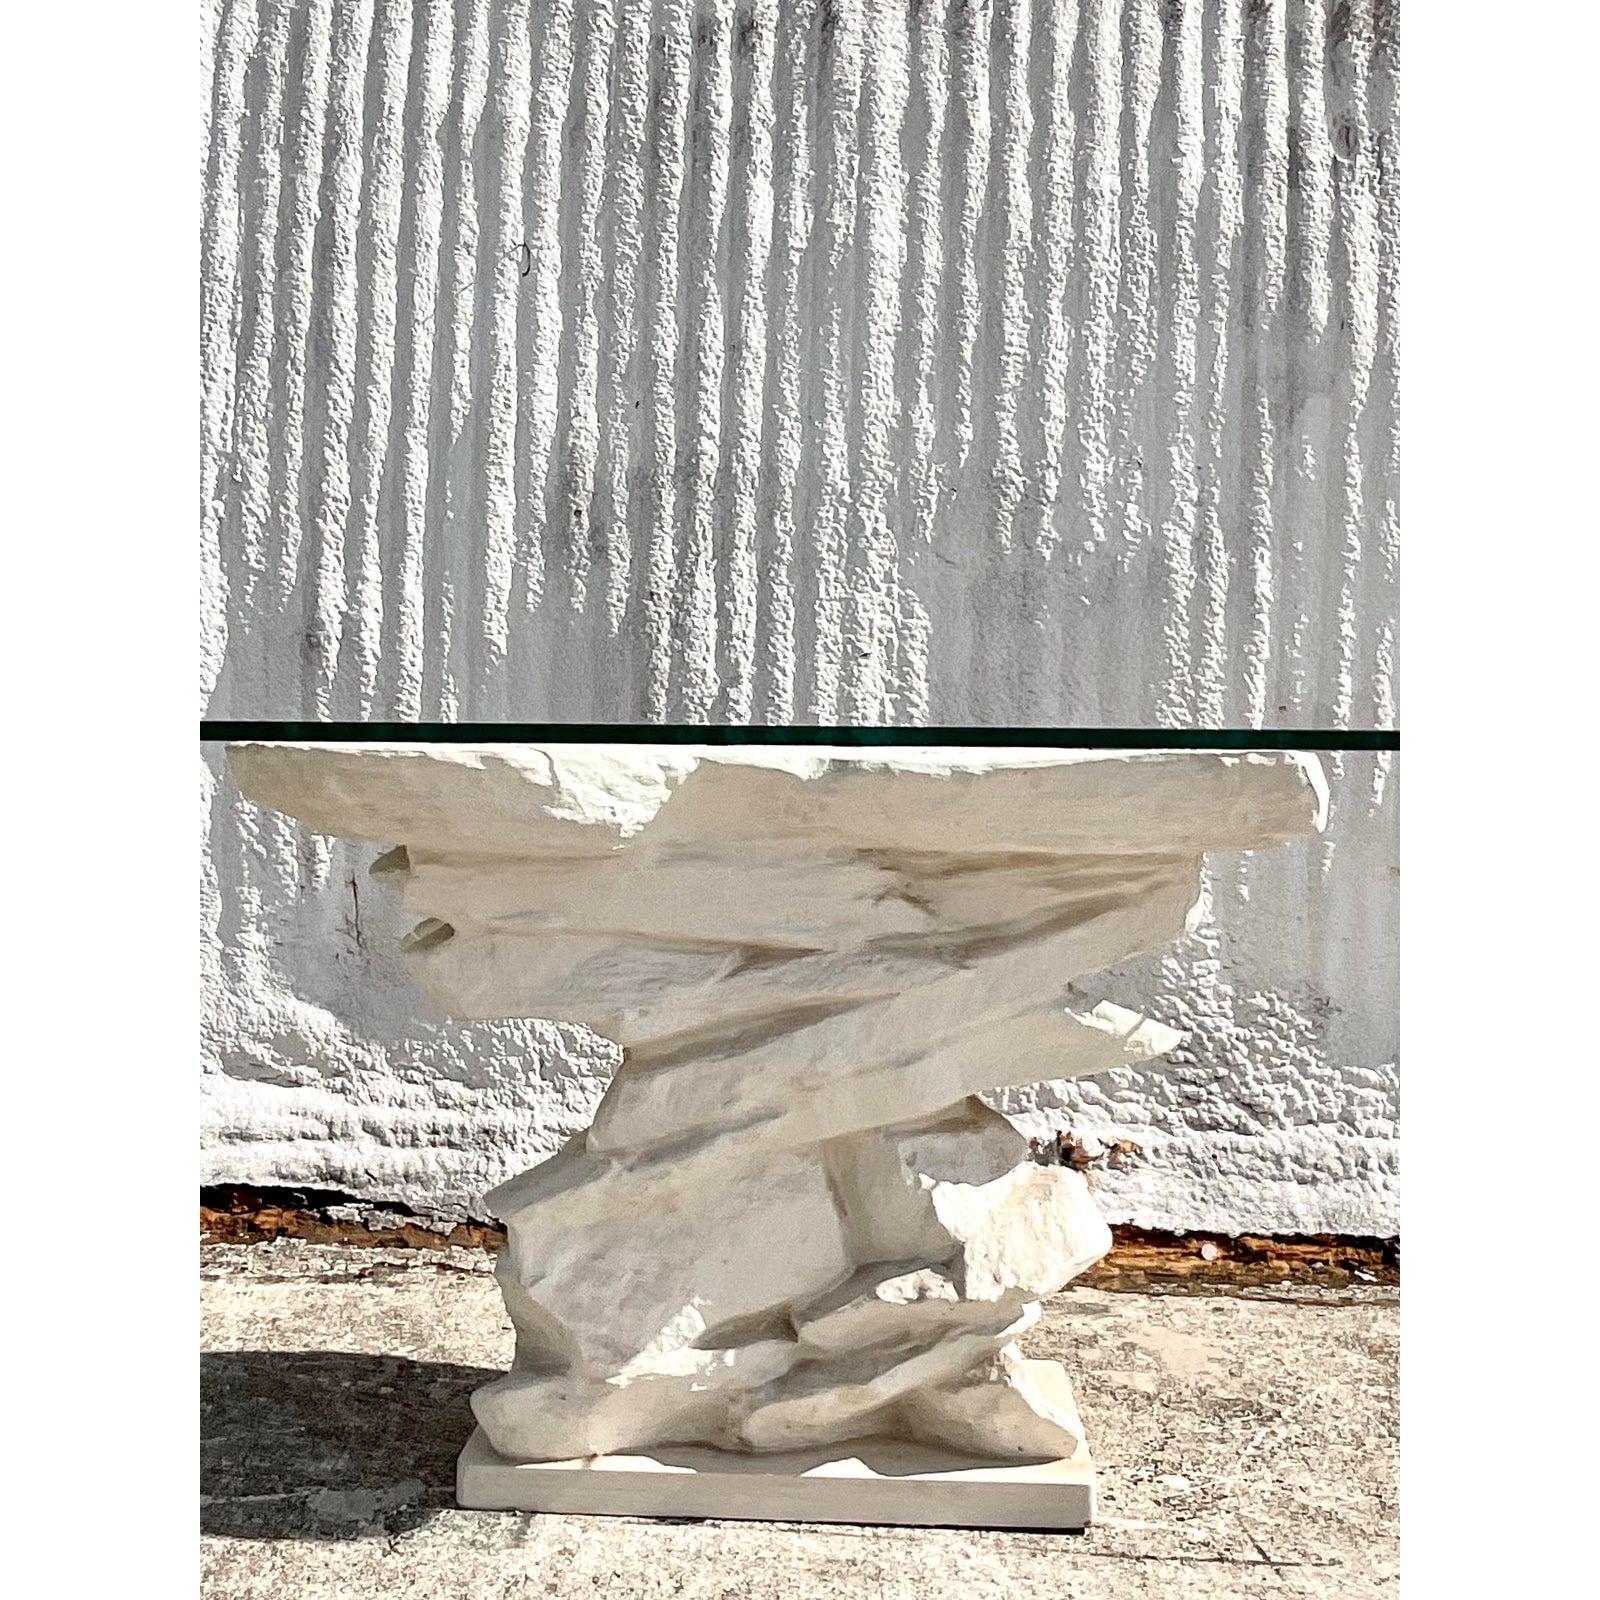 Incredible vintage white plaster console table. A stacked stone design made by the Sirmos group. Done in the manner of Emilio Terry. Glass top rests on surface. Acquired from a Palm Beach estate.